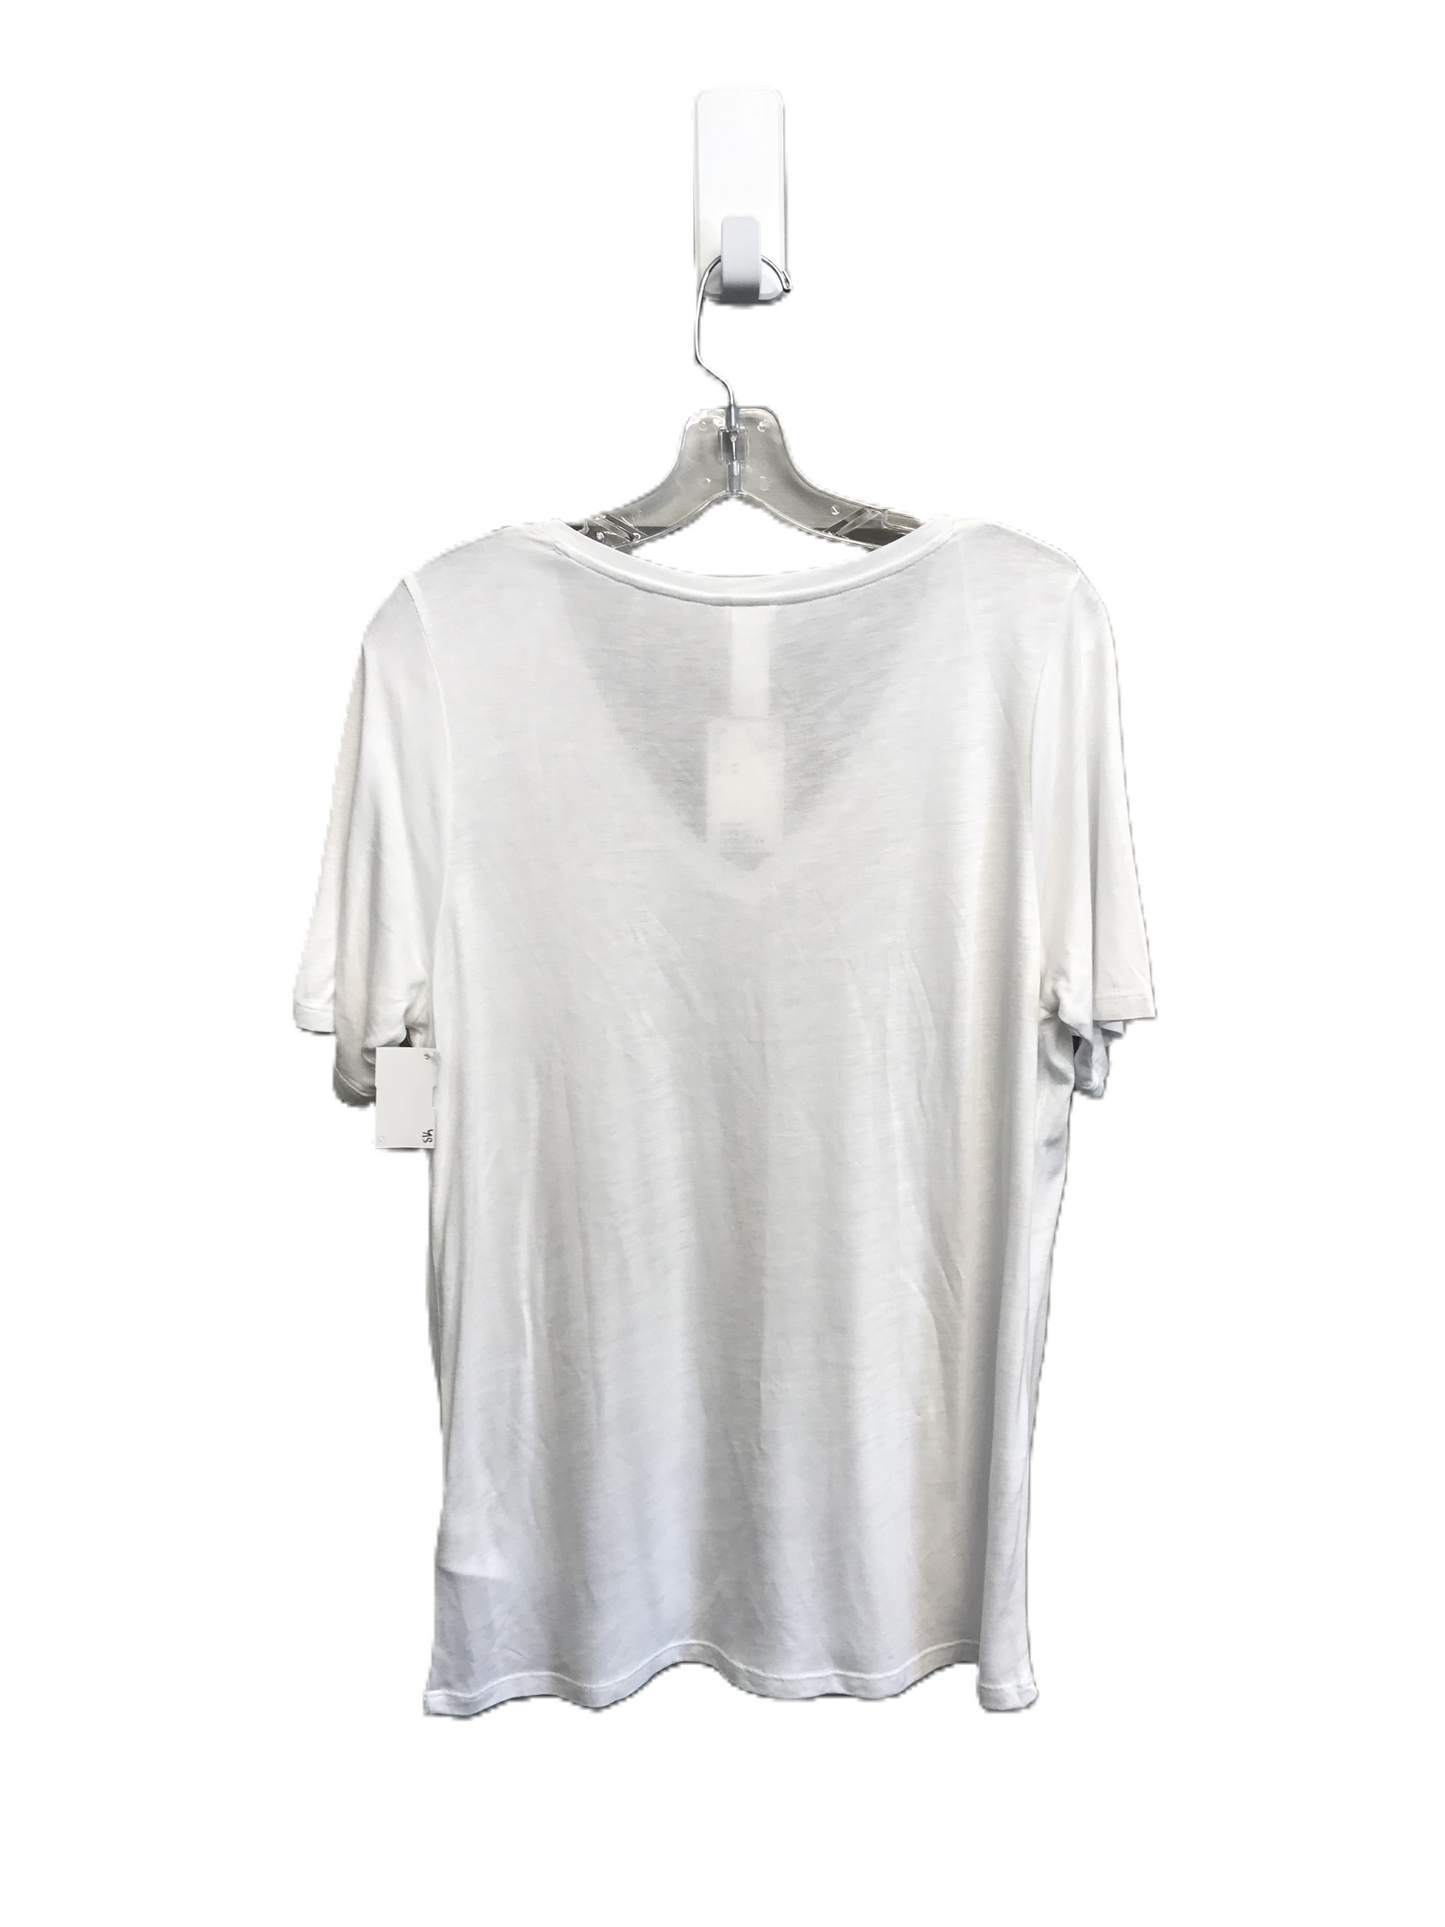 White Top Short Sleeve Basic By H&m, Size: M